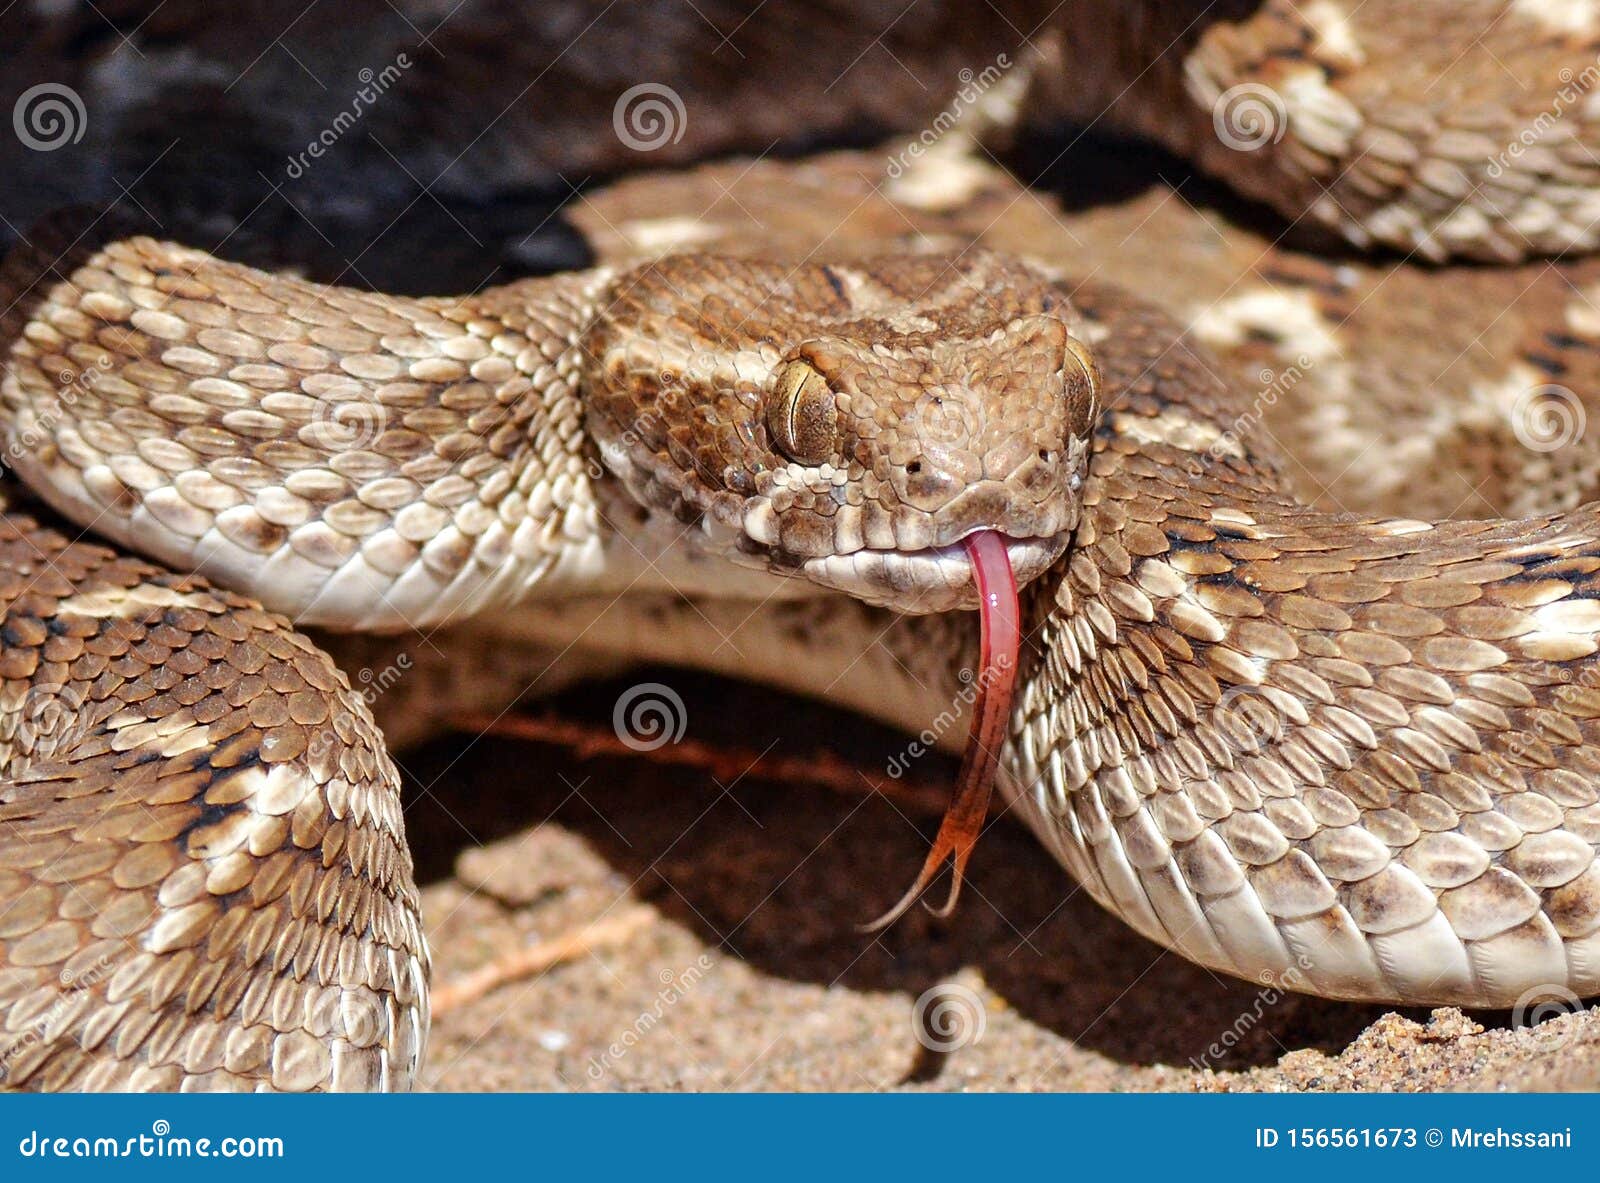 Saw-scaled Viper Animal Facts  Echis carinatus - A-Z Animals